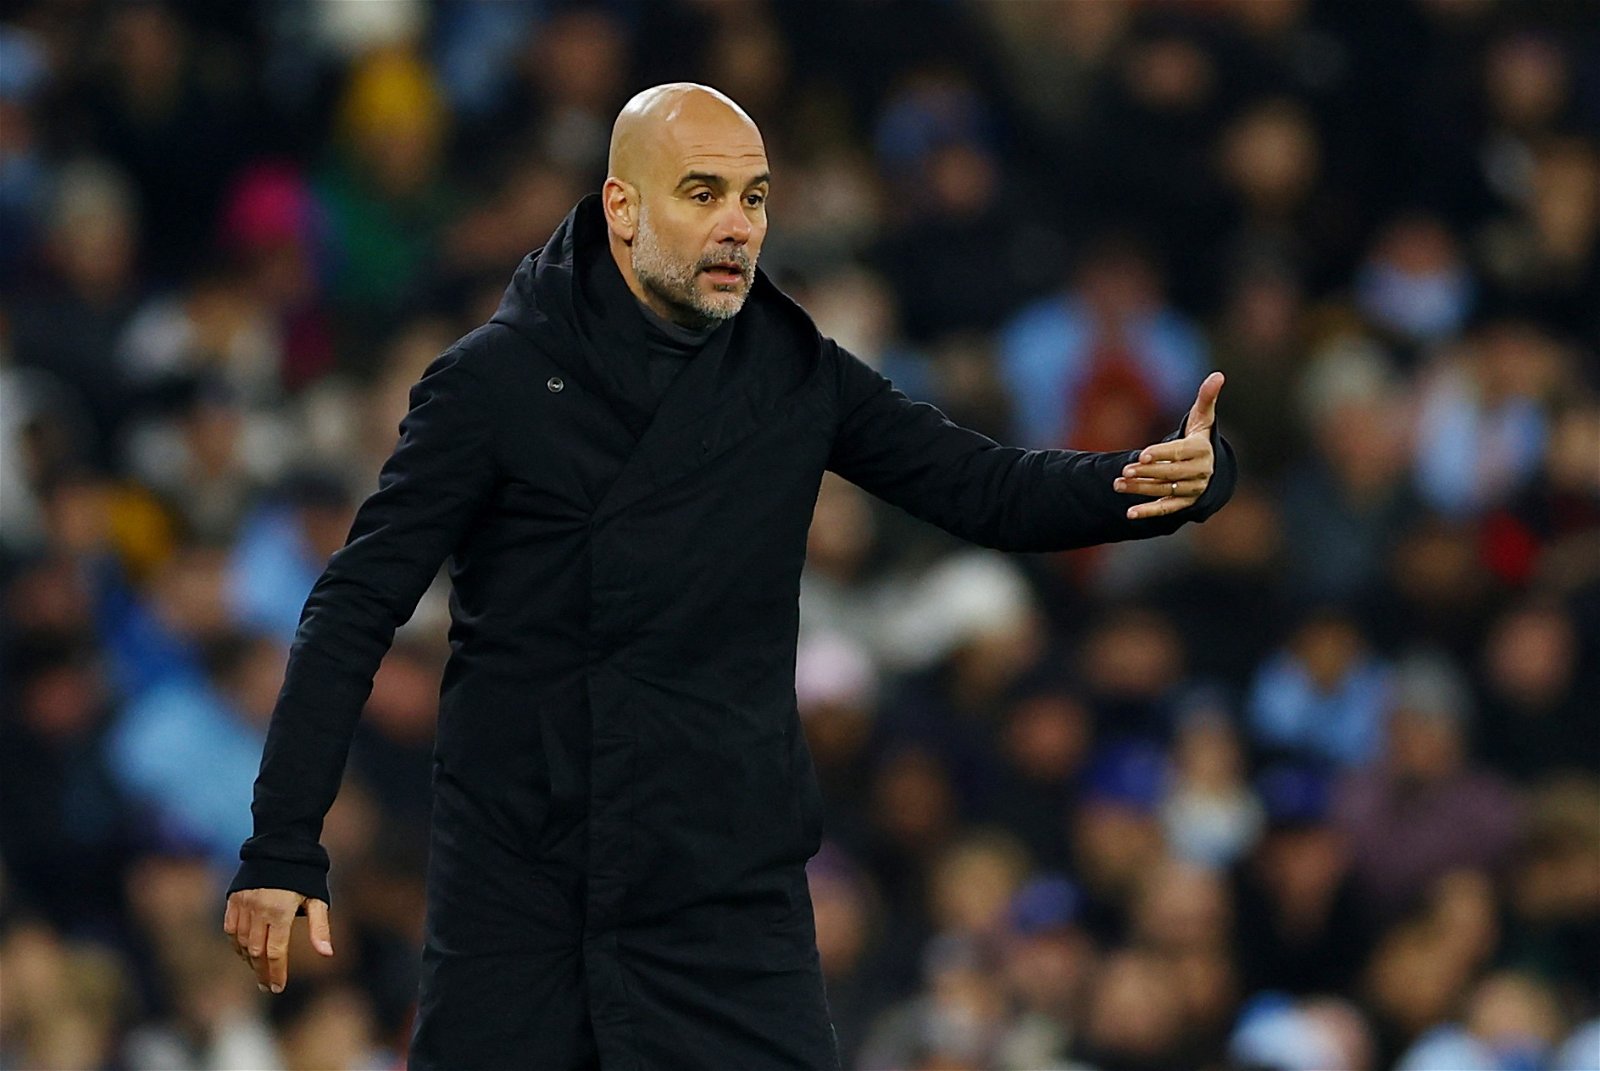 Pep Guardiola feels his side "are in big, big trouble" after players demanded rest